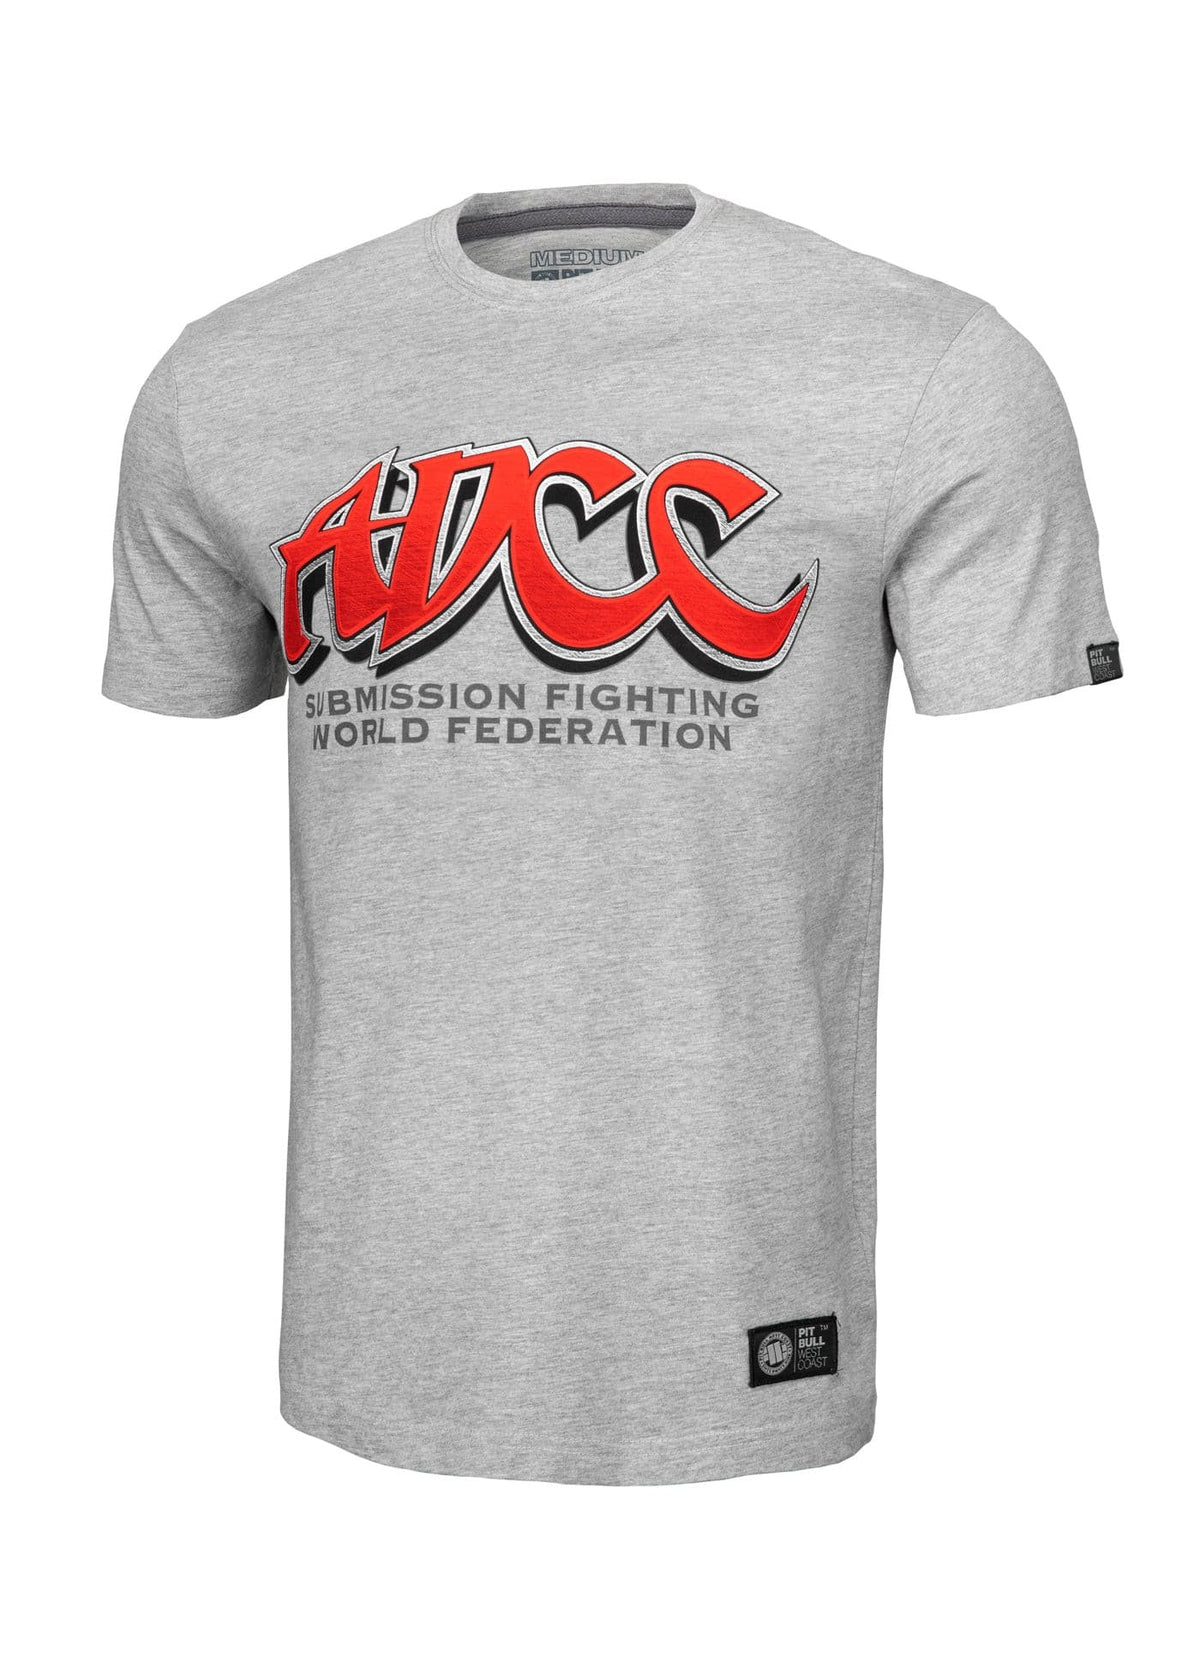 Official ADCC Grey T-Shirt.